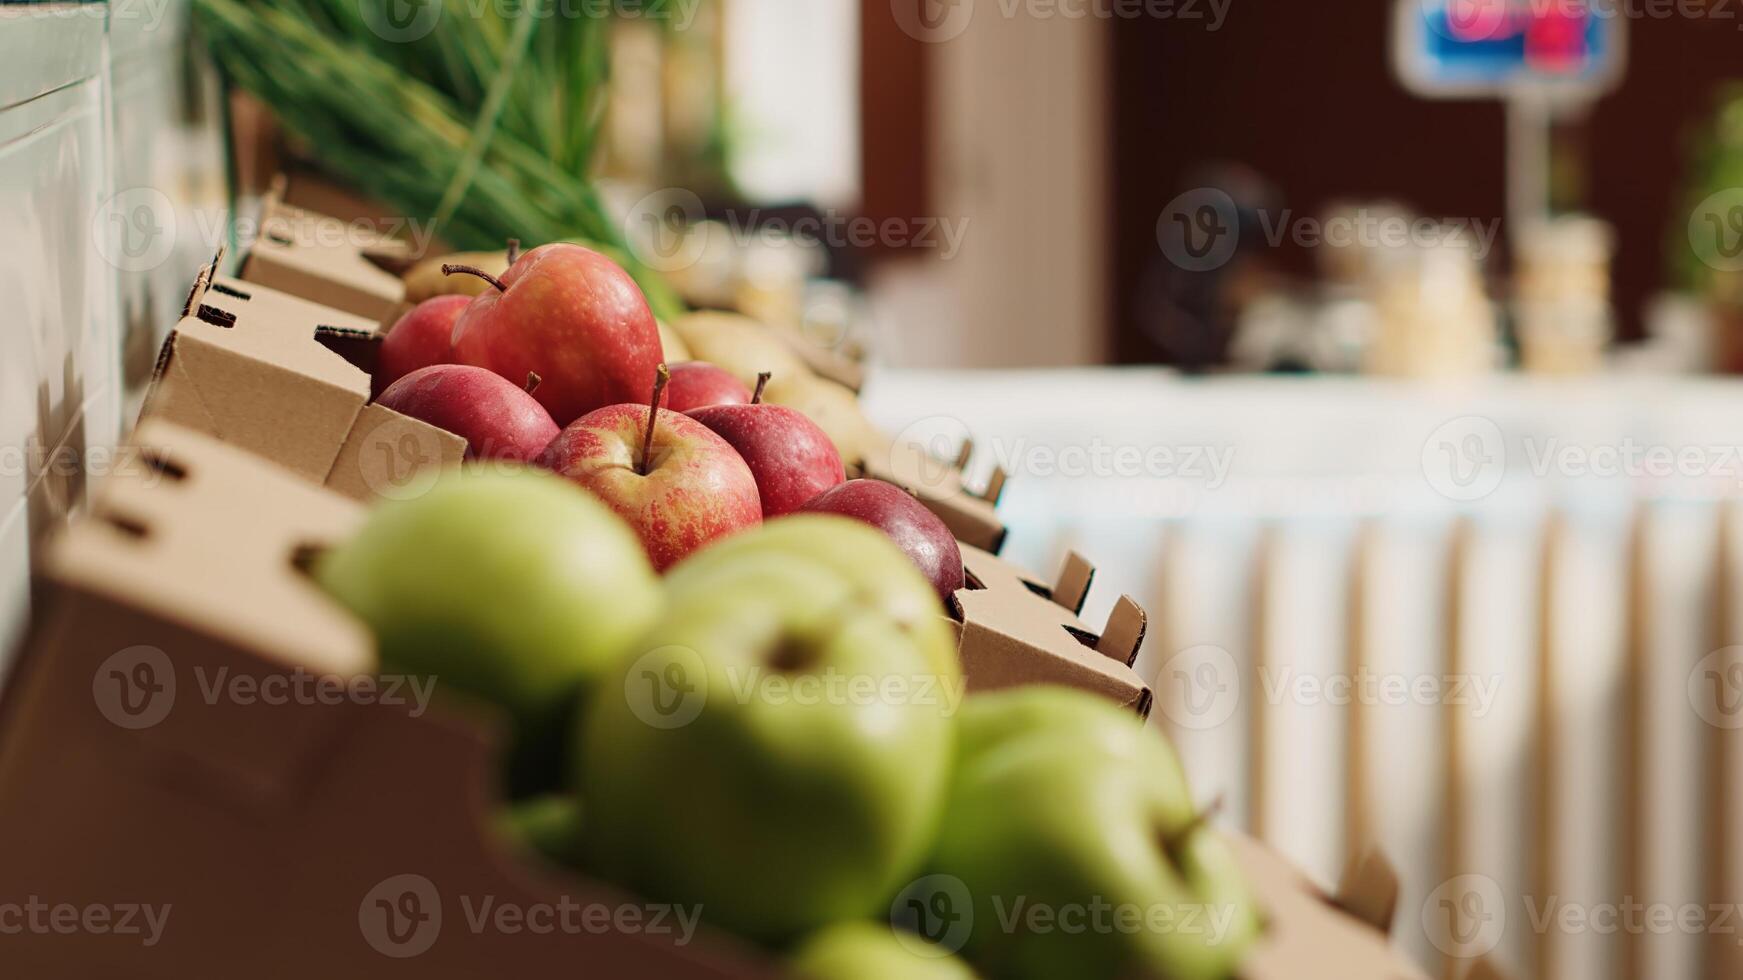 Close up panning shot of natural fruits and vegetables on farmers market shelves. Freshly harvested additives free food items in environmentally responsible zero waste supermarket photo